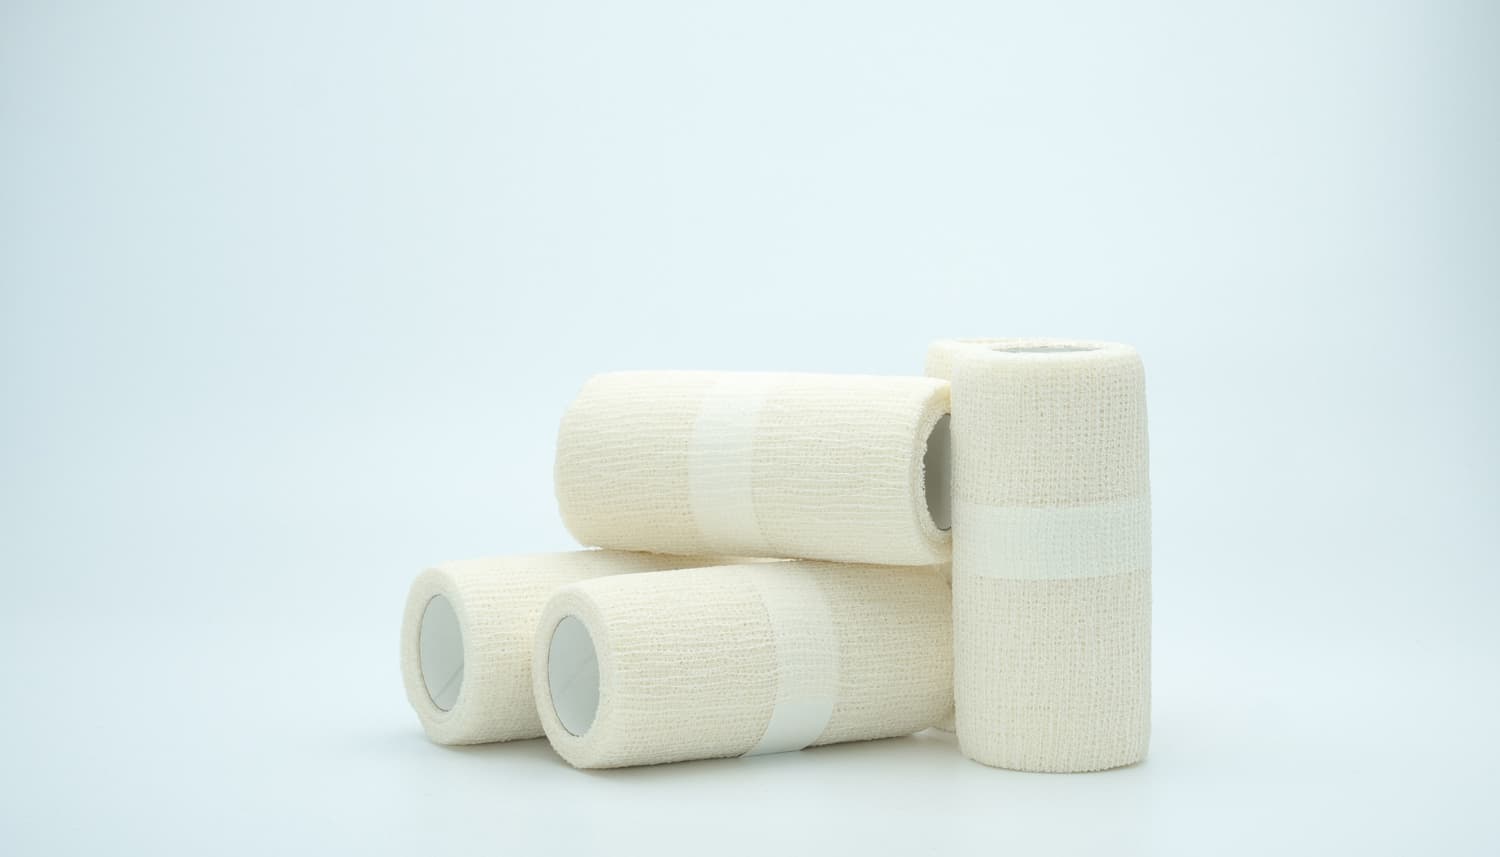 wound care elastic bandage isolated-white background with copy space